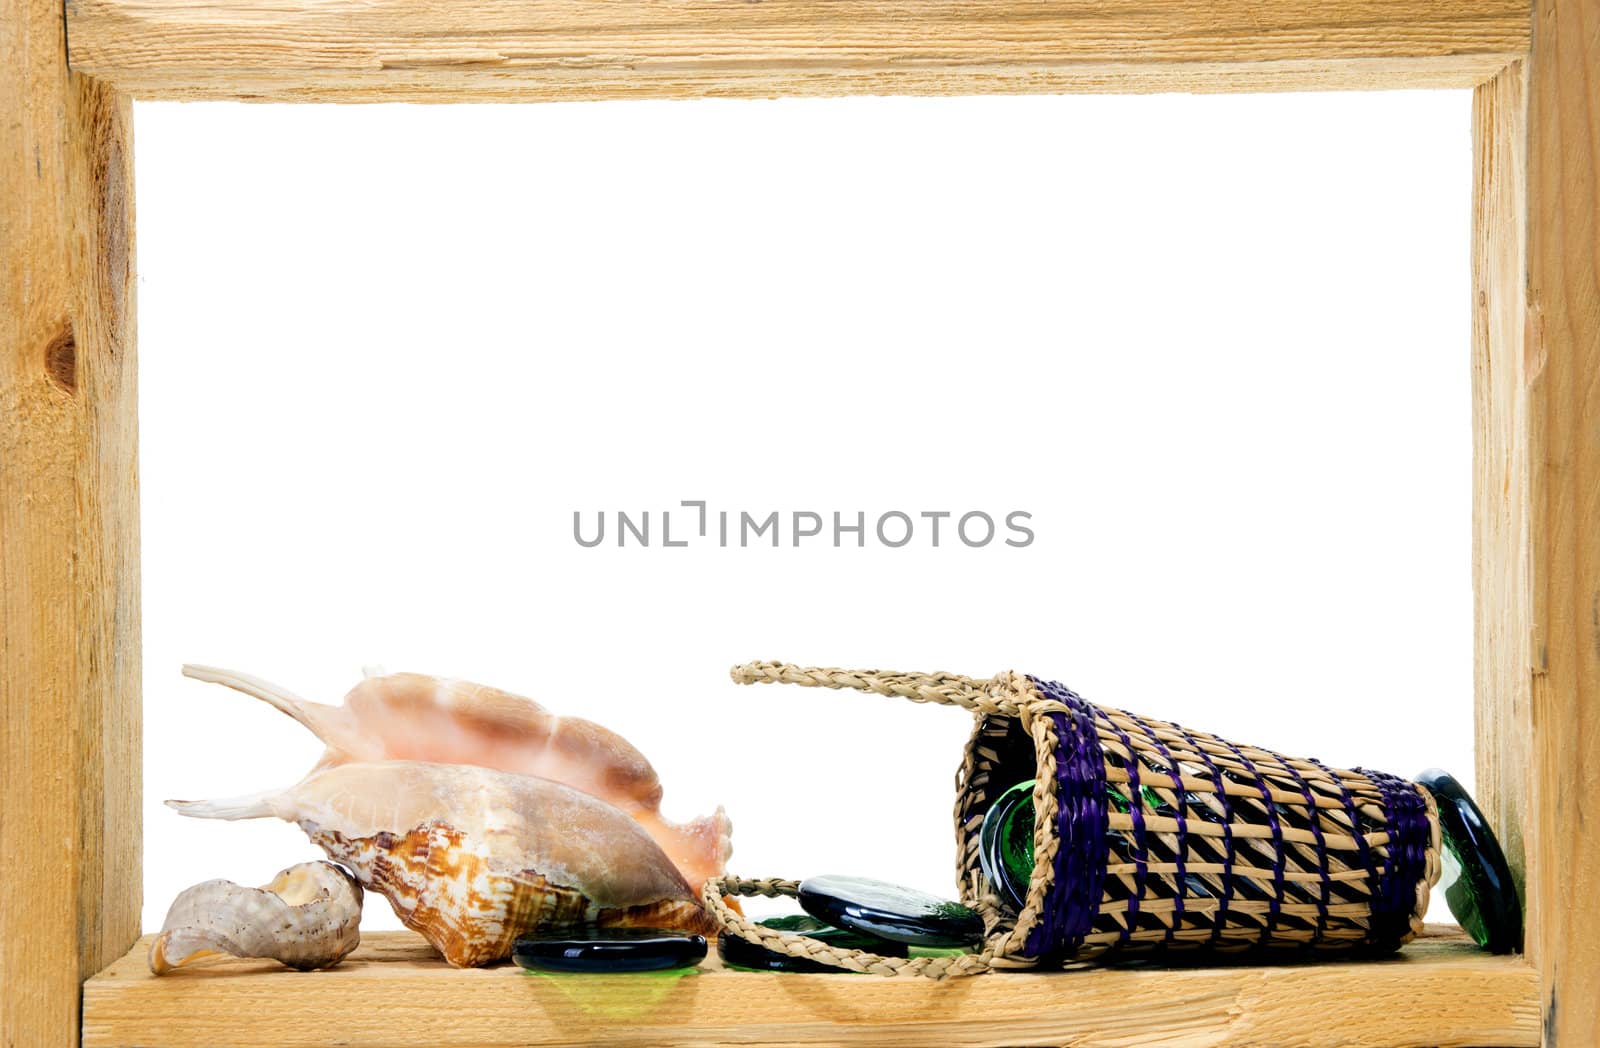 Wicker, green pieces of glass and sea shells inside rough wooden frame on white background